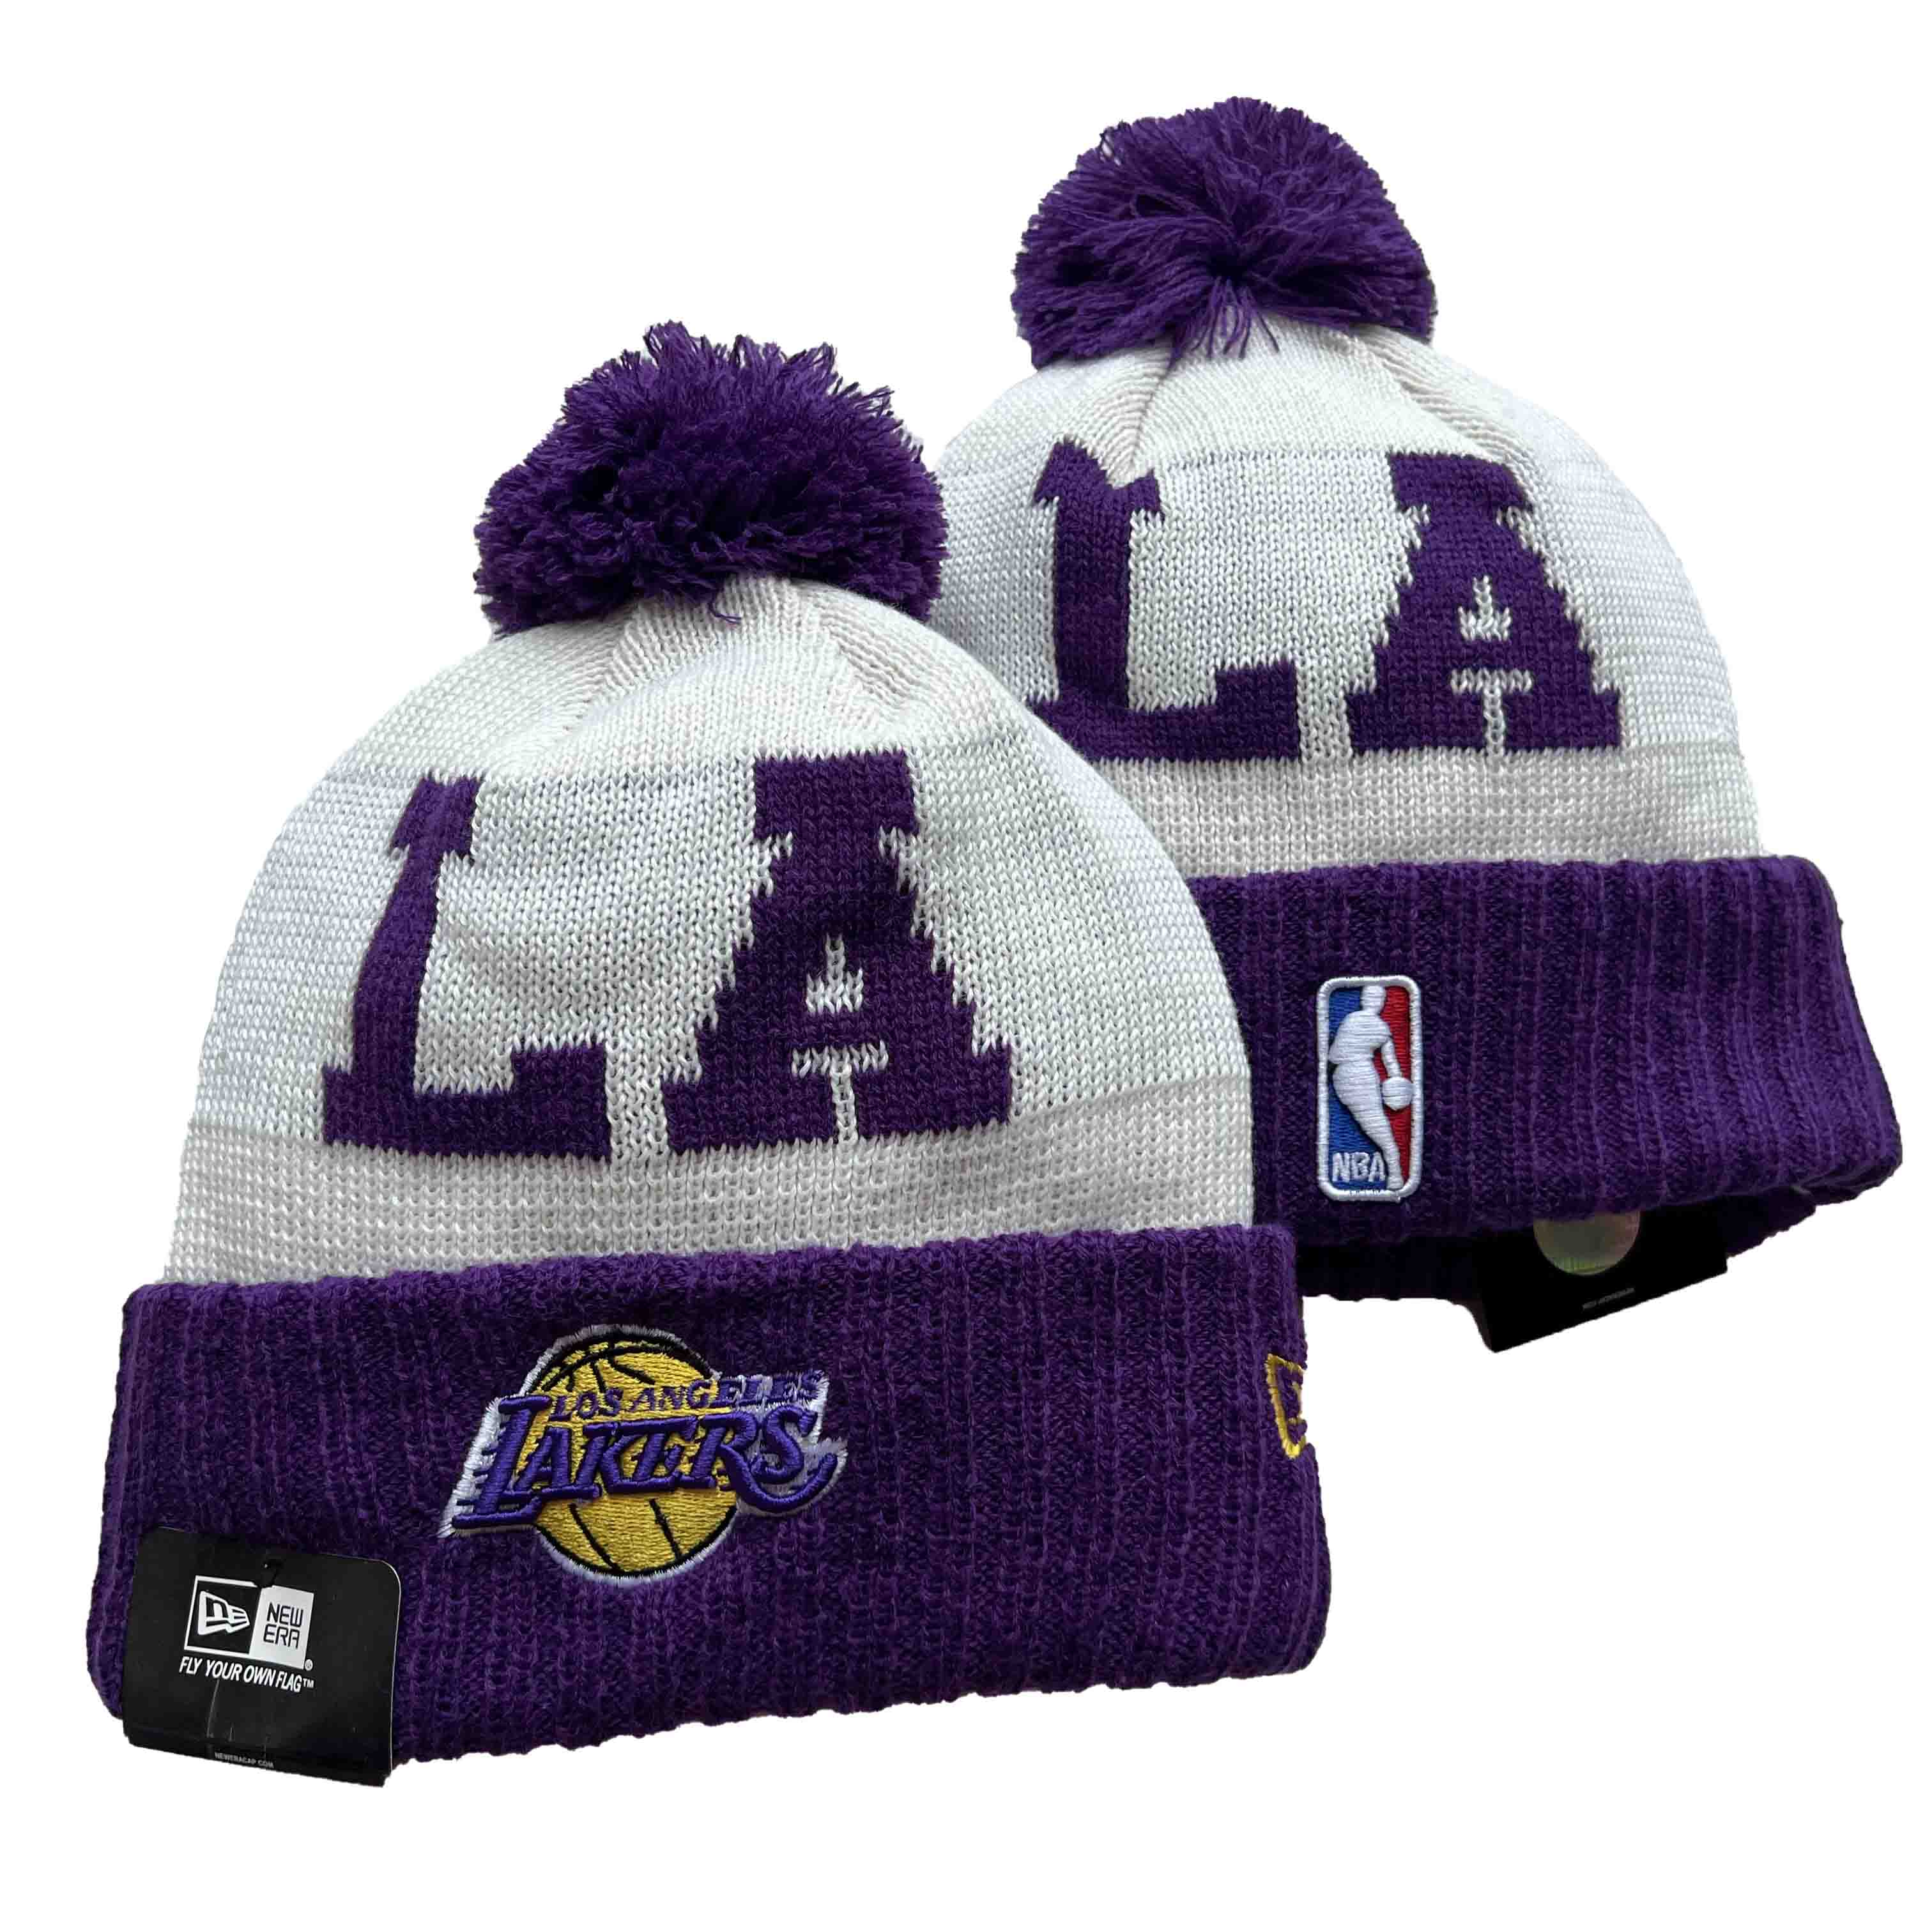 NBA Los Angeles Lakers Beanies Knit Hats-YD492